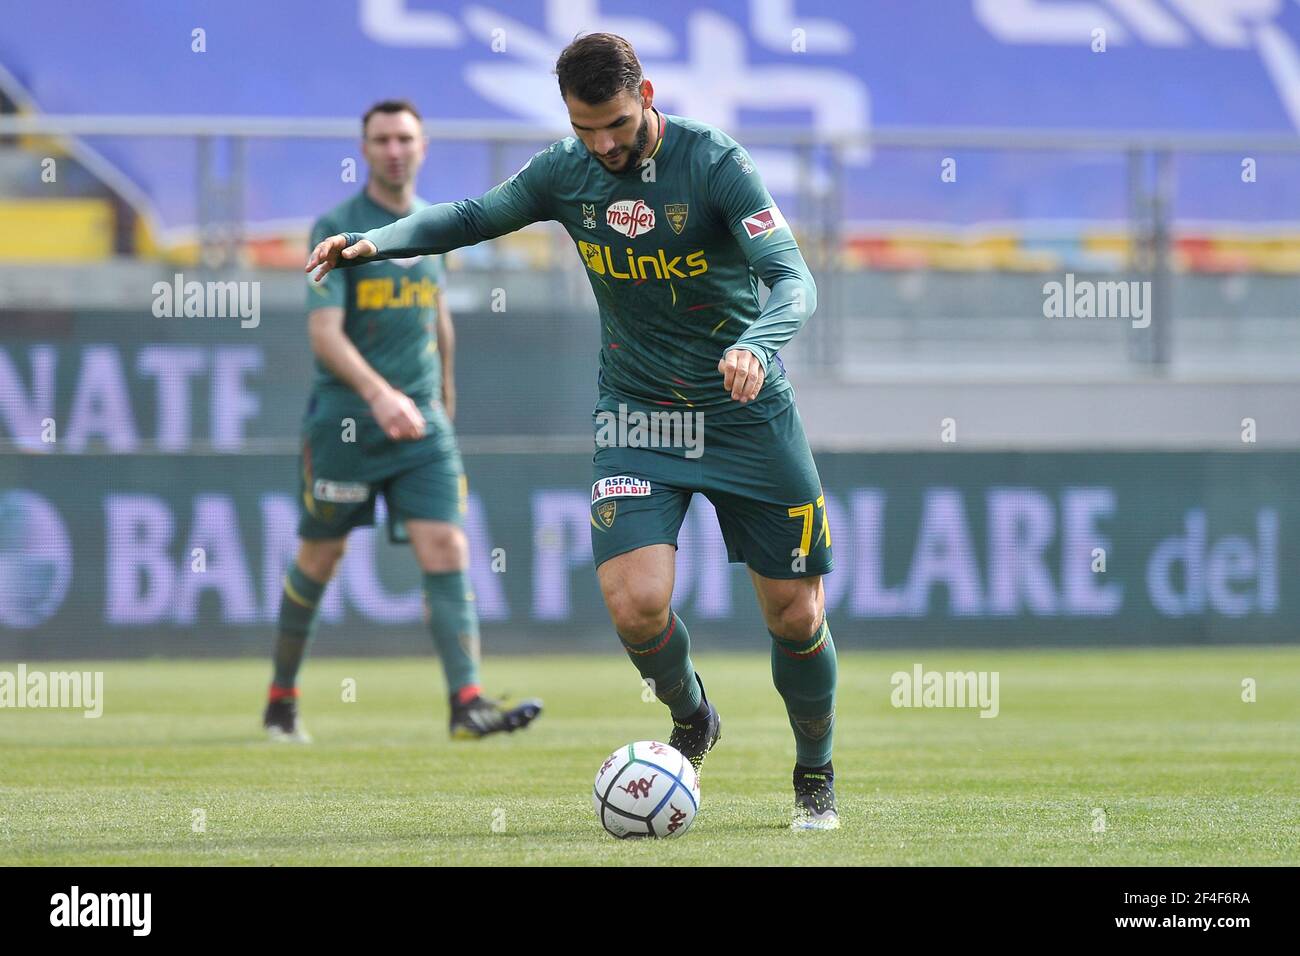 Panagiotis Tachtsidis player of Lecce, during the match of the Italian league series B between Frosinone vs Lecce final result 0-3, match played at th Stock Photo